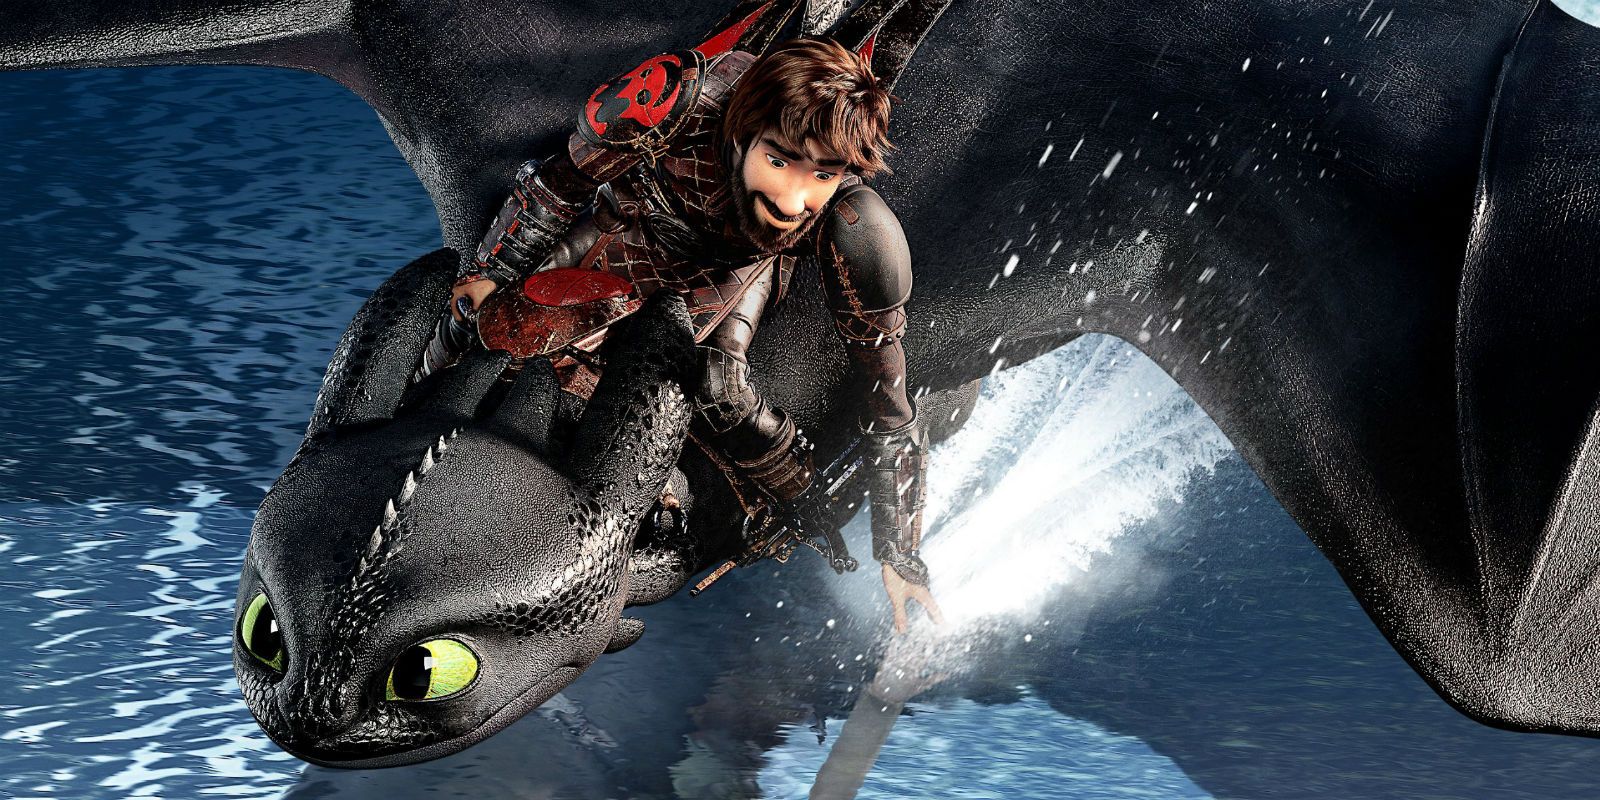 How To Train Your Dragon 3 Ending Explained: Dragons Leave ...